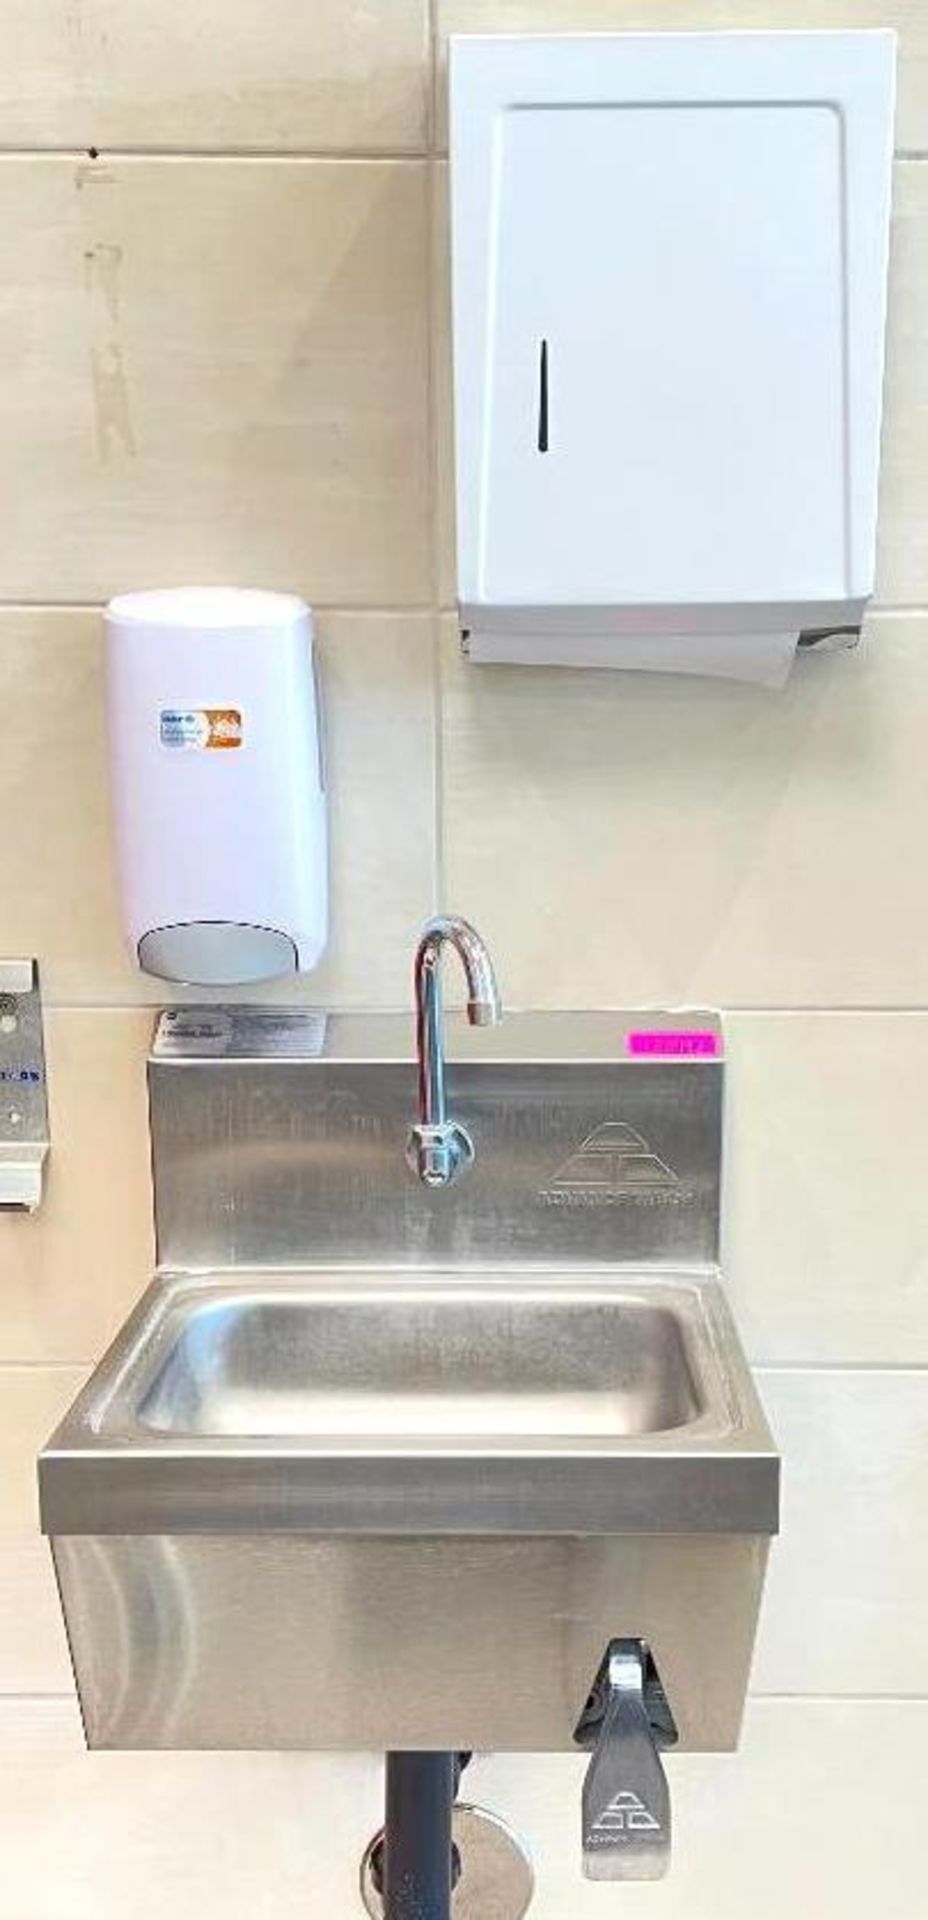 DESCRIPTION: 17" X 15" STAINLESS WALL-MOUNTED SINK W/ SOAP & PAPER TOWEL DISPENSERS SIZE: 17" X 15"